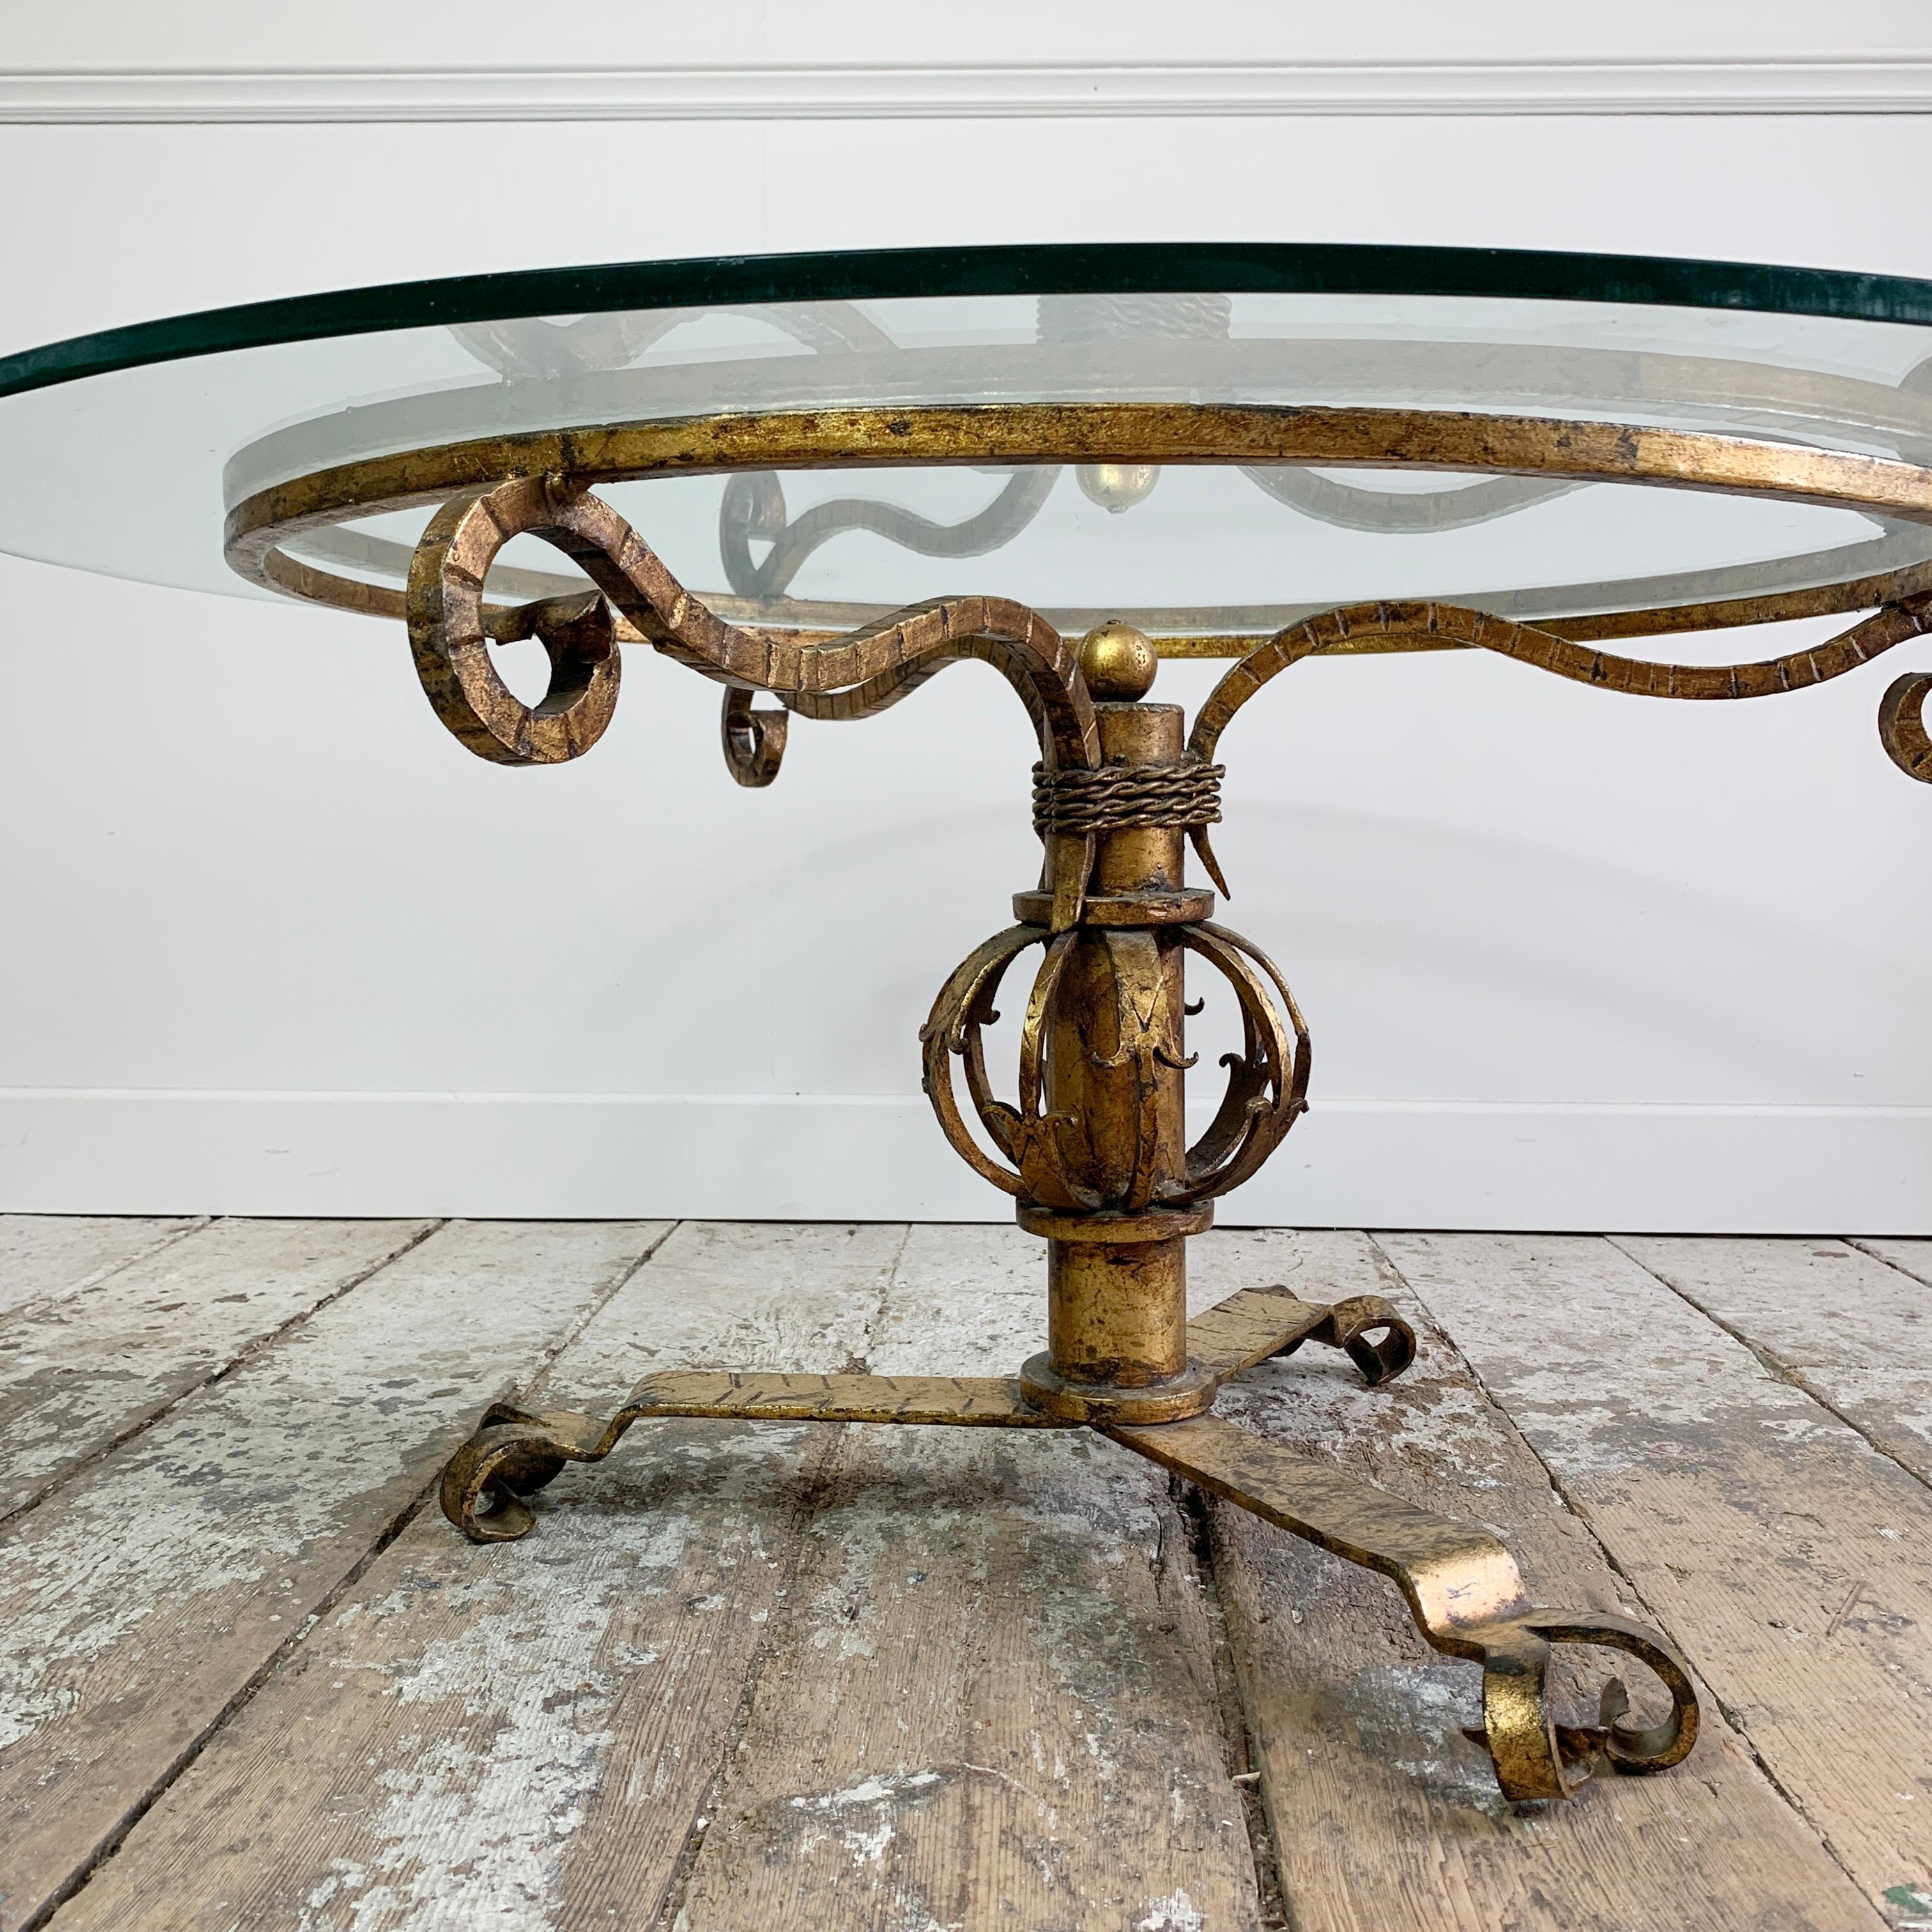 Superb 1930's gilt Spanish coffee table. Intricately hand forged in Iron, the table is wonderfully decorative, with rope twist, and turned details.

The worked iron has been completely gilded, and the top is a replacement glass.

Measures: Width